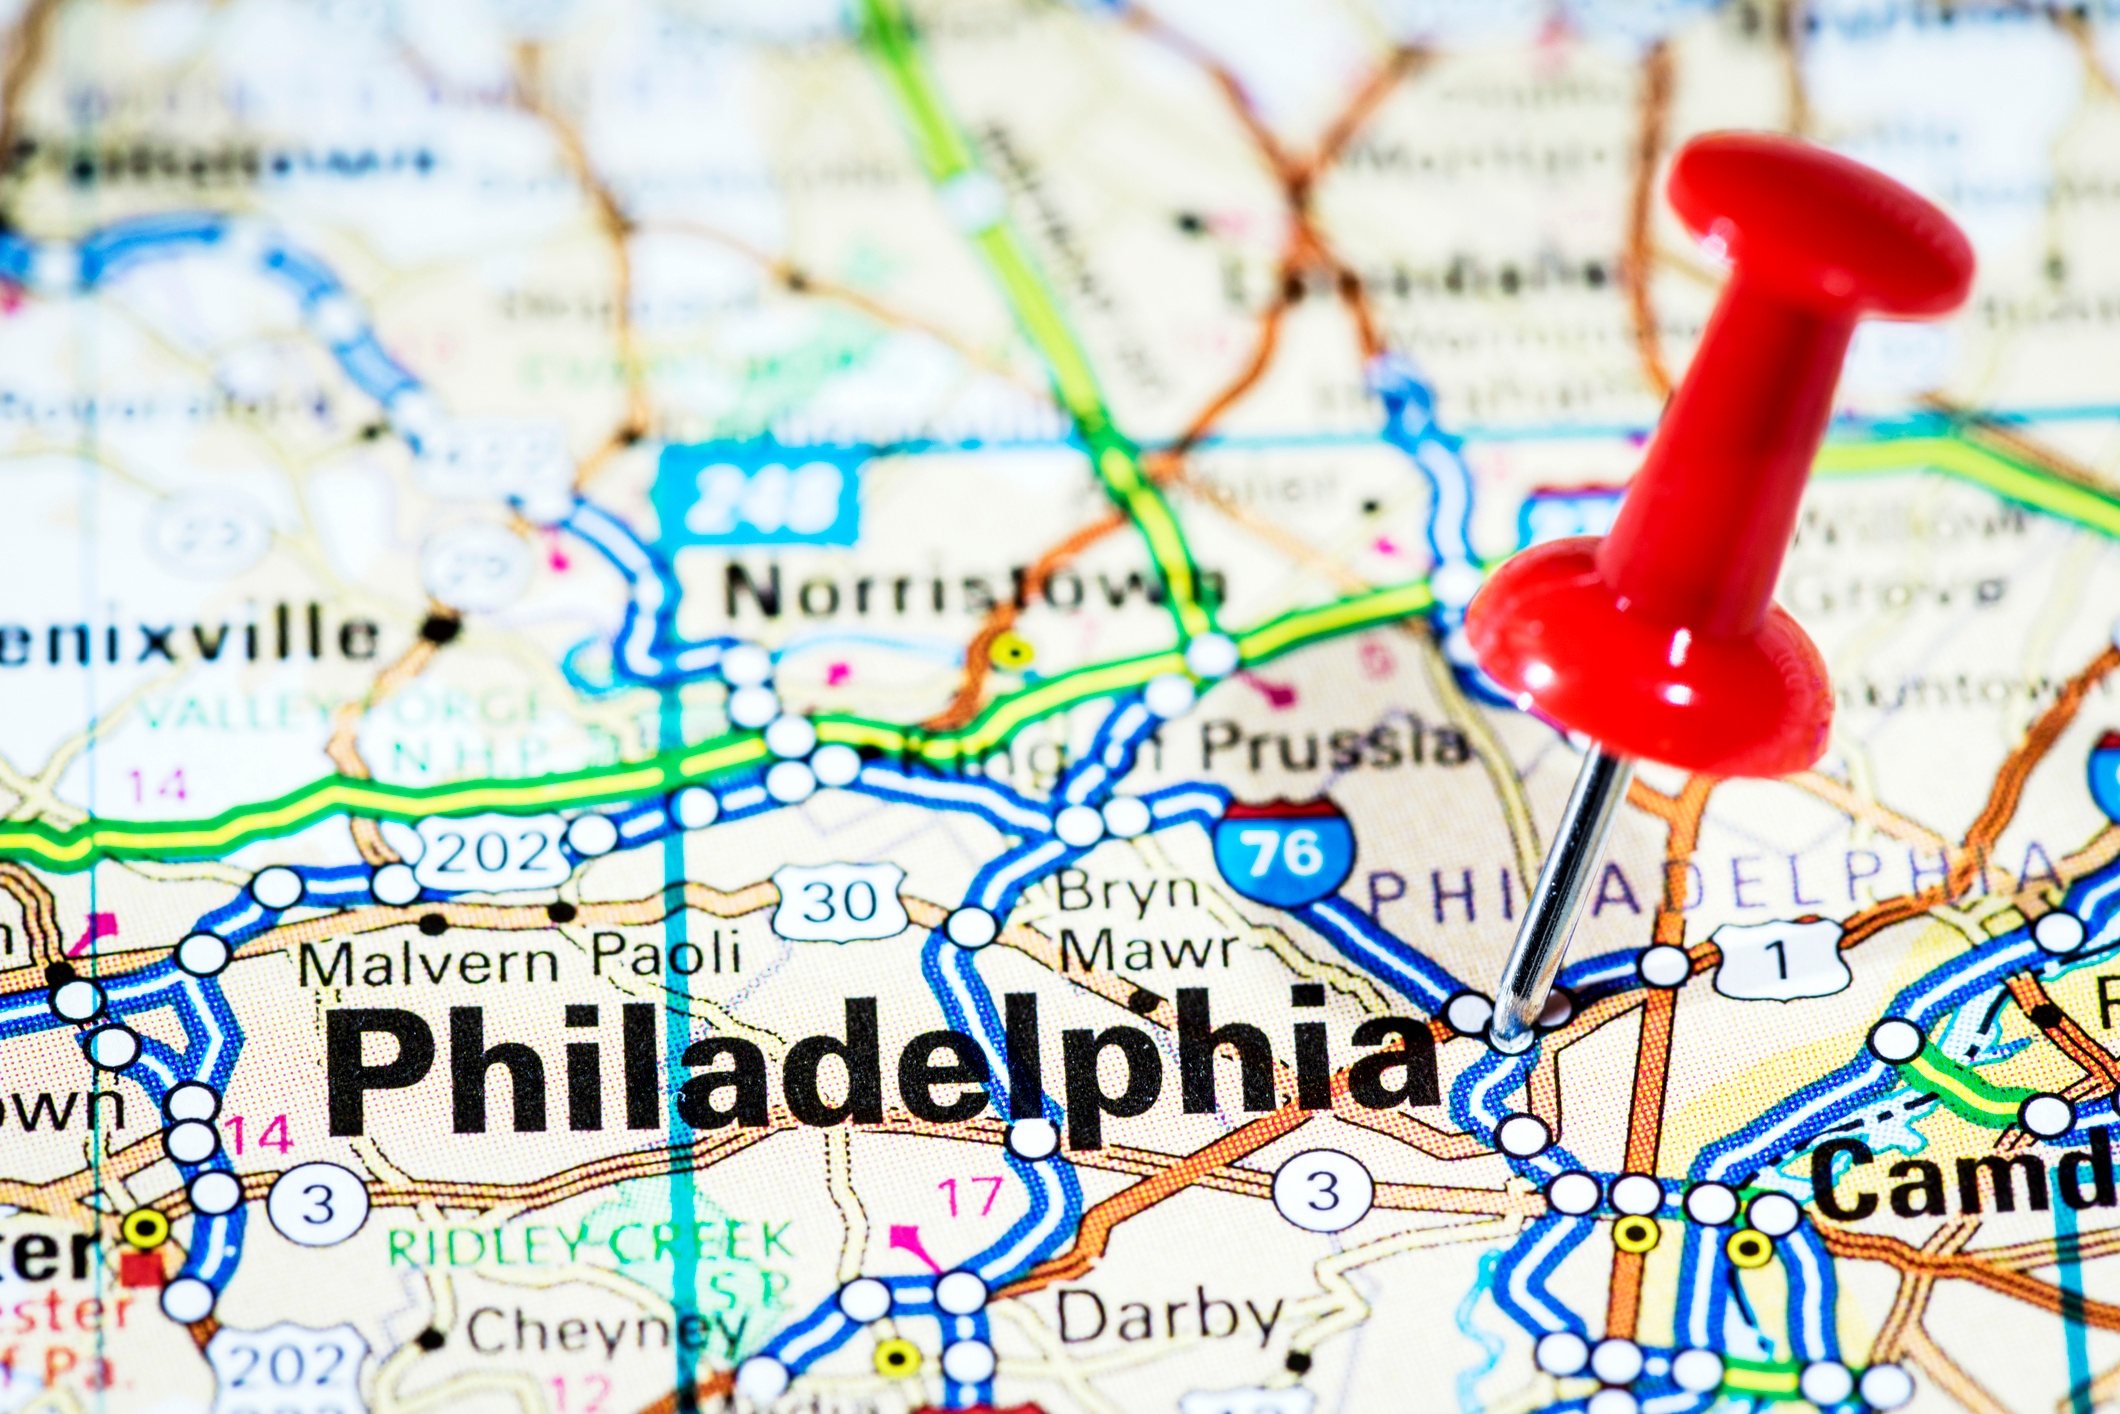 Marketing Influencers in Philly You Need to Follow